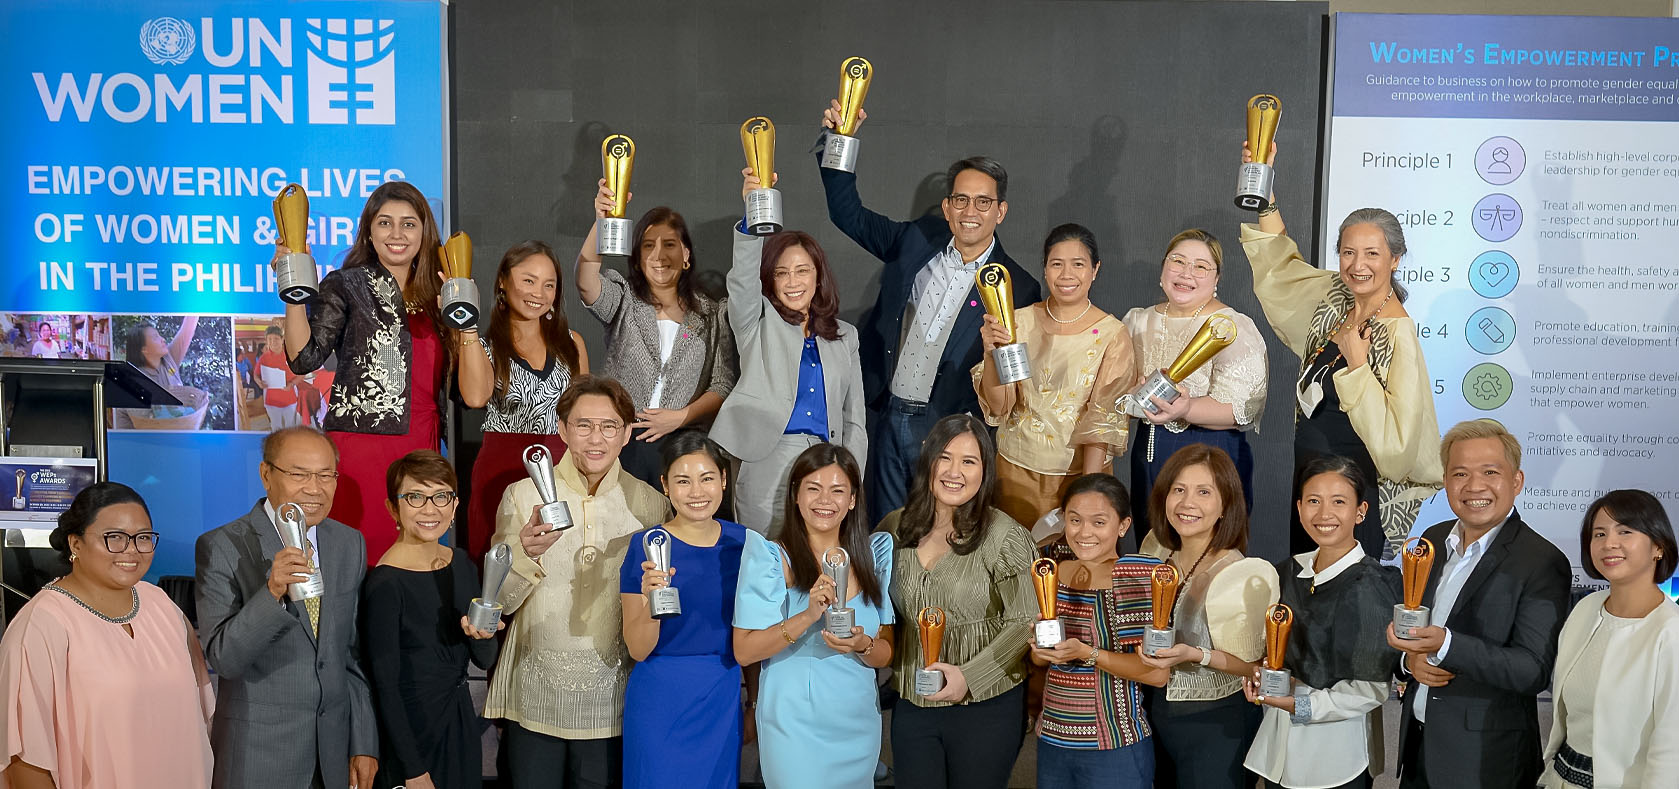 The winners and runners-up of 2022 Philippines Women’s Empowerment Principles Awards celebrate at the awards ceremony in Manila, Philippines on 20 October 2022. Photo: Philippine Business Coalition for Women Empowerment/Paolo Pangan